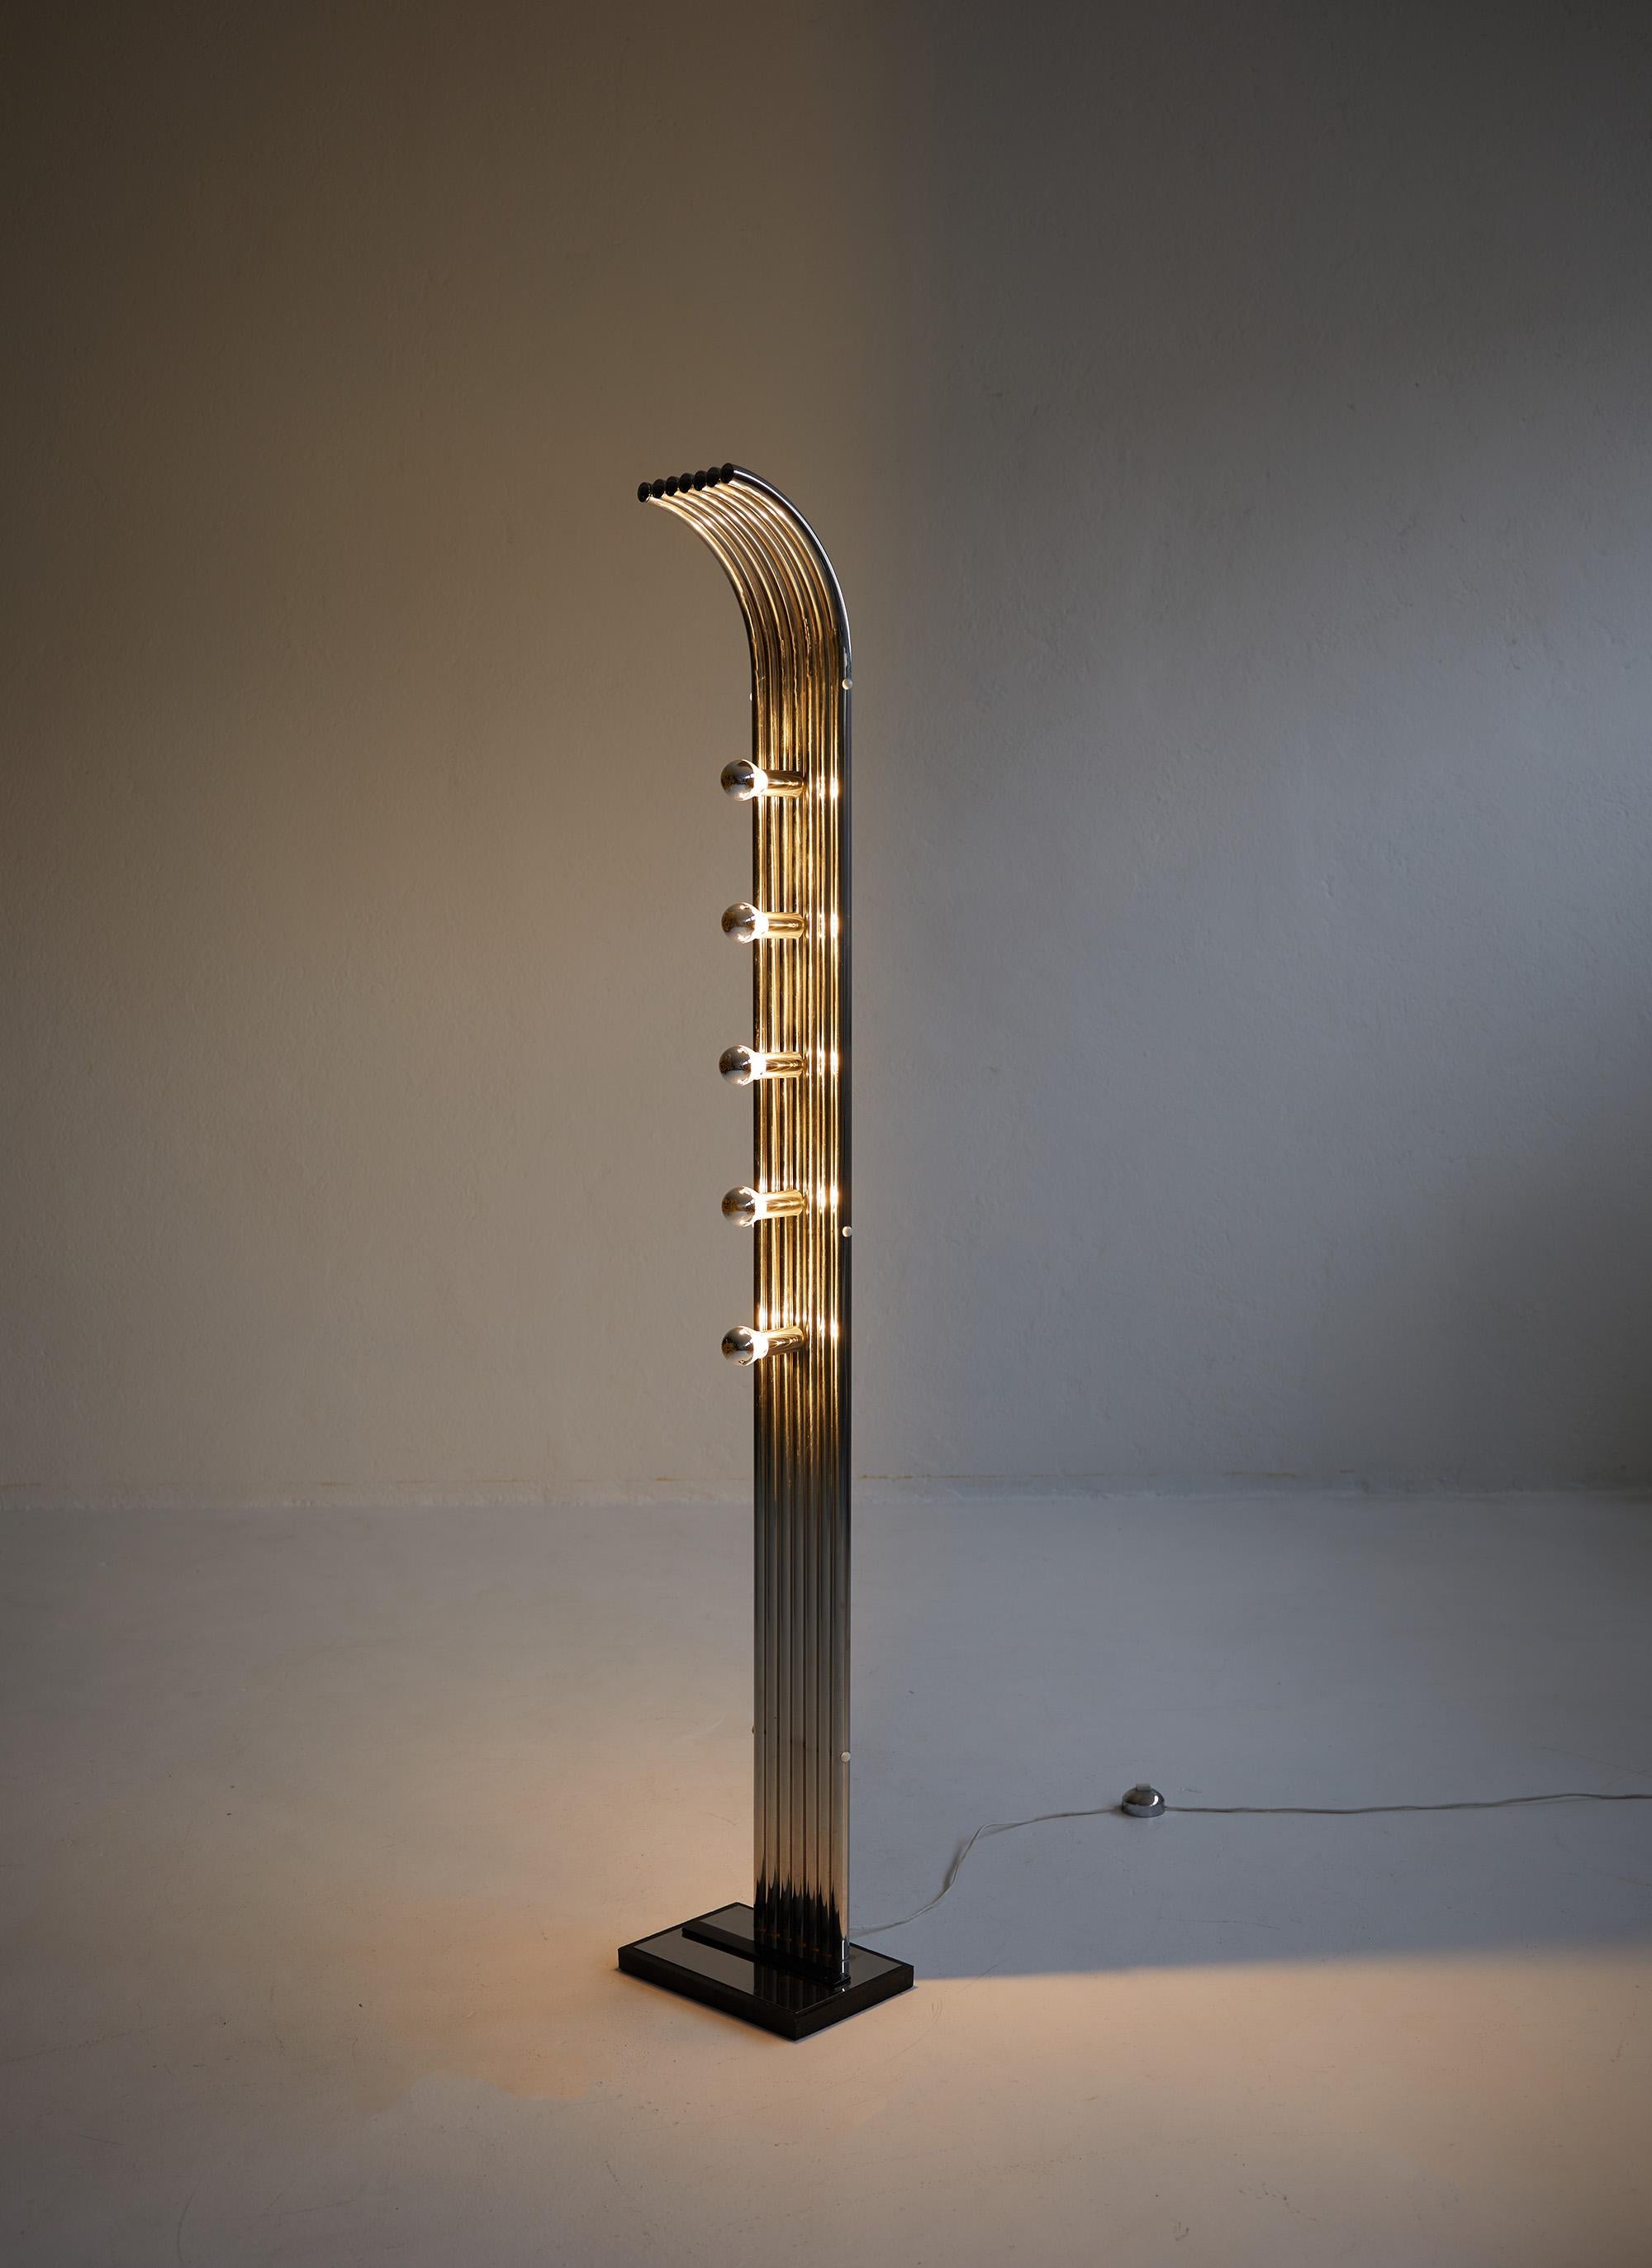 Floor lamp in chromed metal by Geoffredo Reggiani, Italy 1970.

This exquisite piece exemplifies Goffredo Reggiani's artistic prowess during the era, with its sleek and contemporary design. The lamp's chromed metal tubes elegantly converge to form a